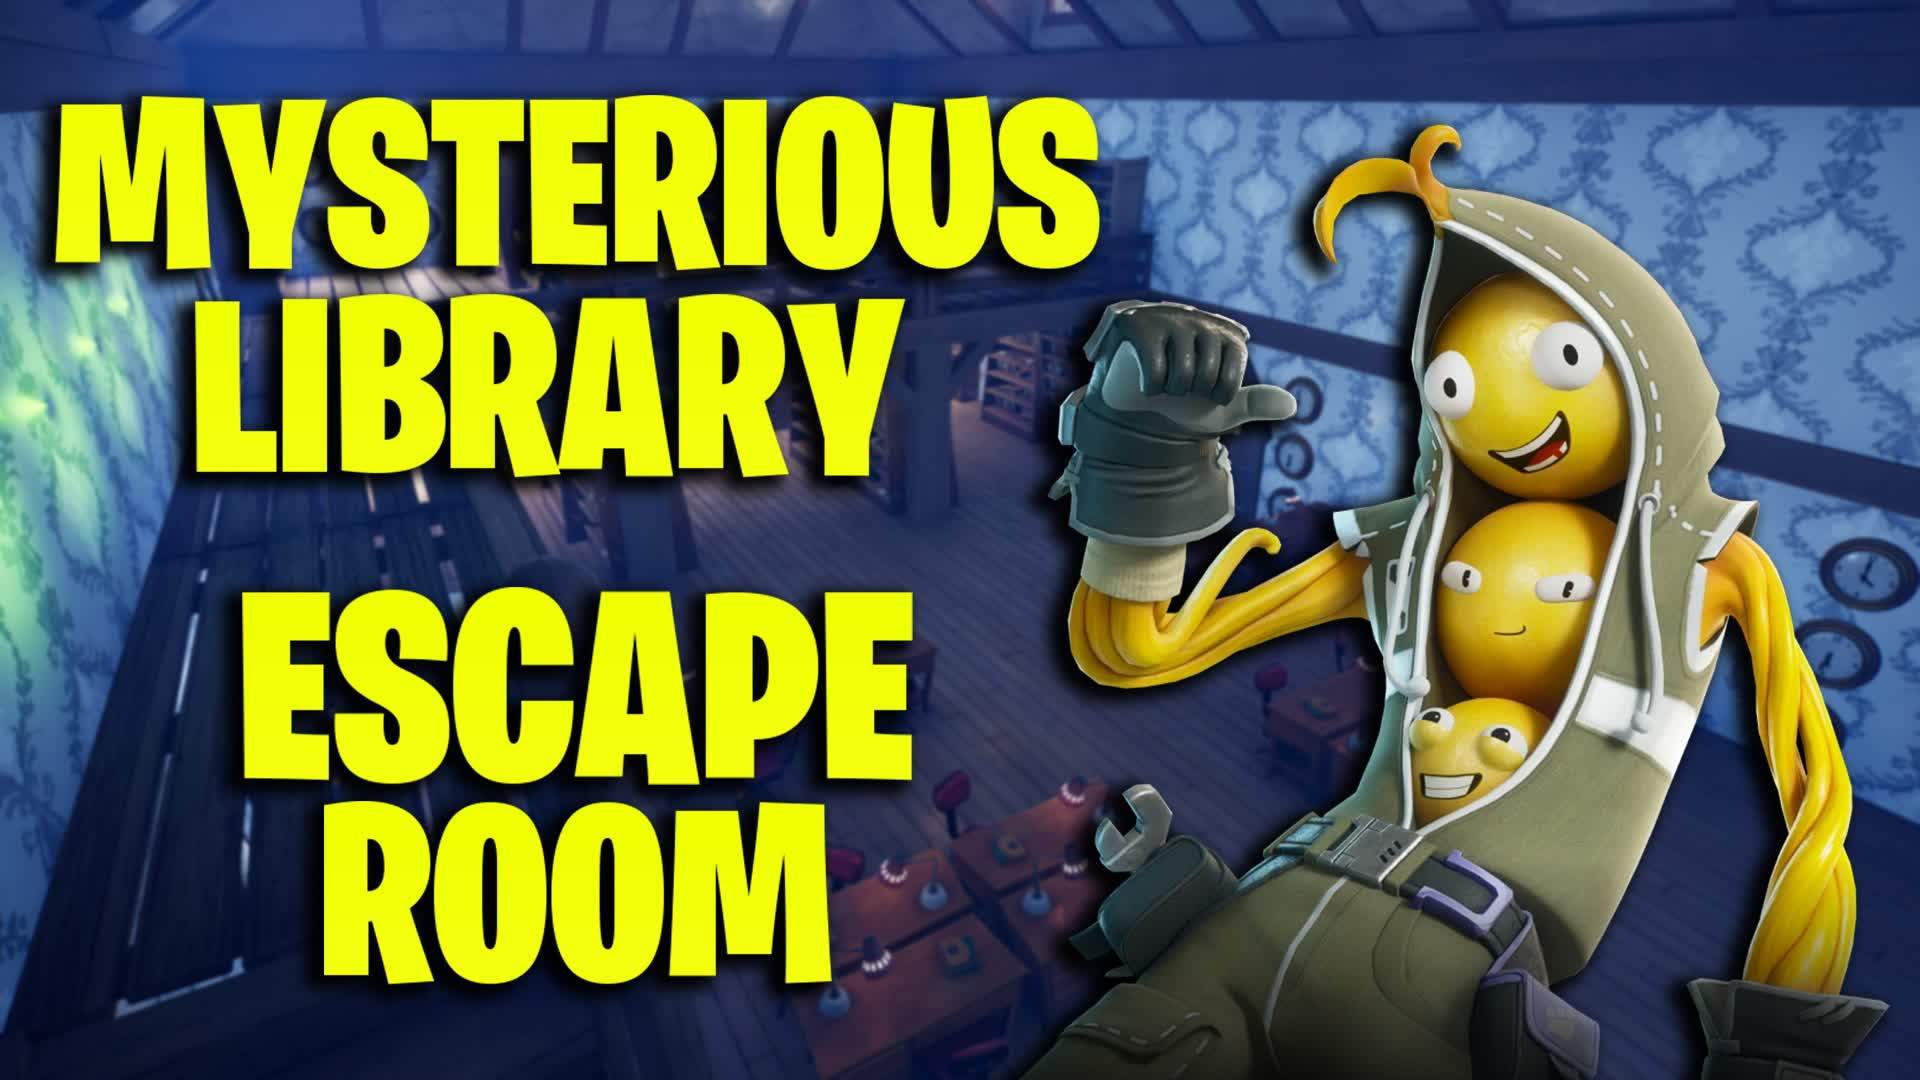 🔎 MYSTERIOUS LIBRARY ESCAPE ROOM 🔎